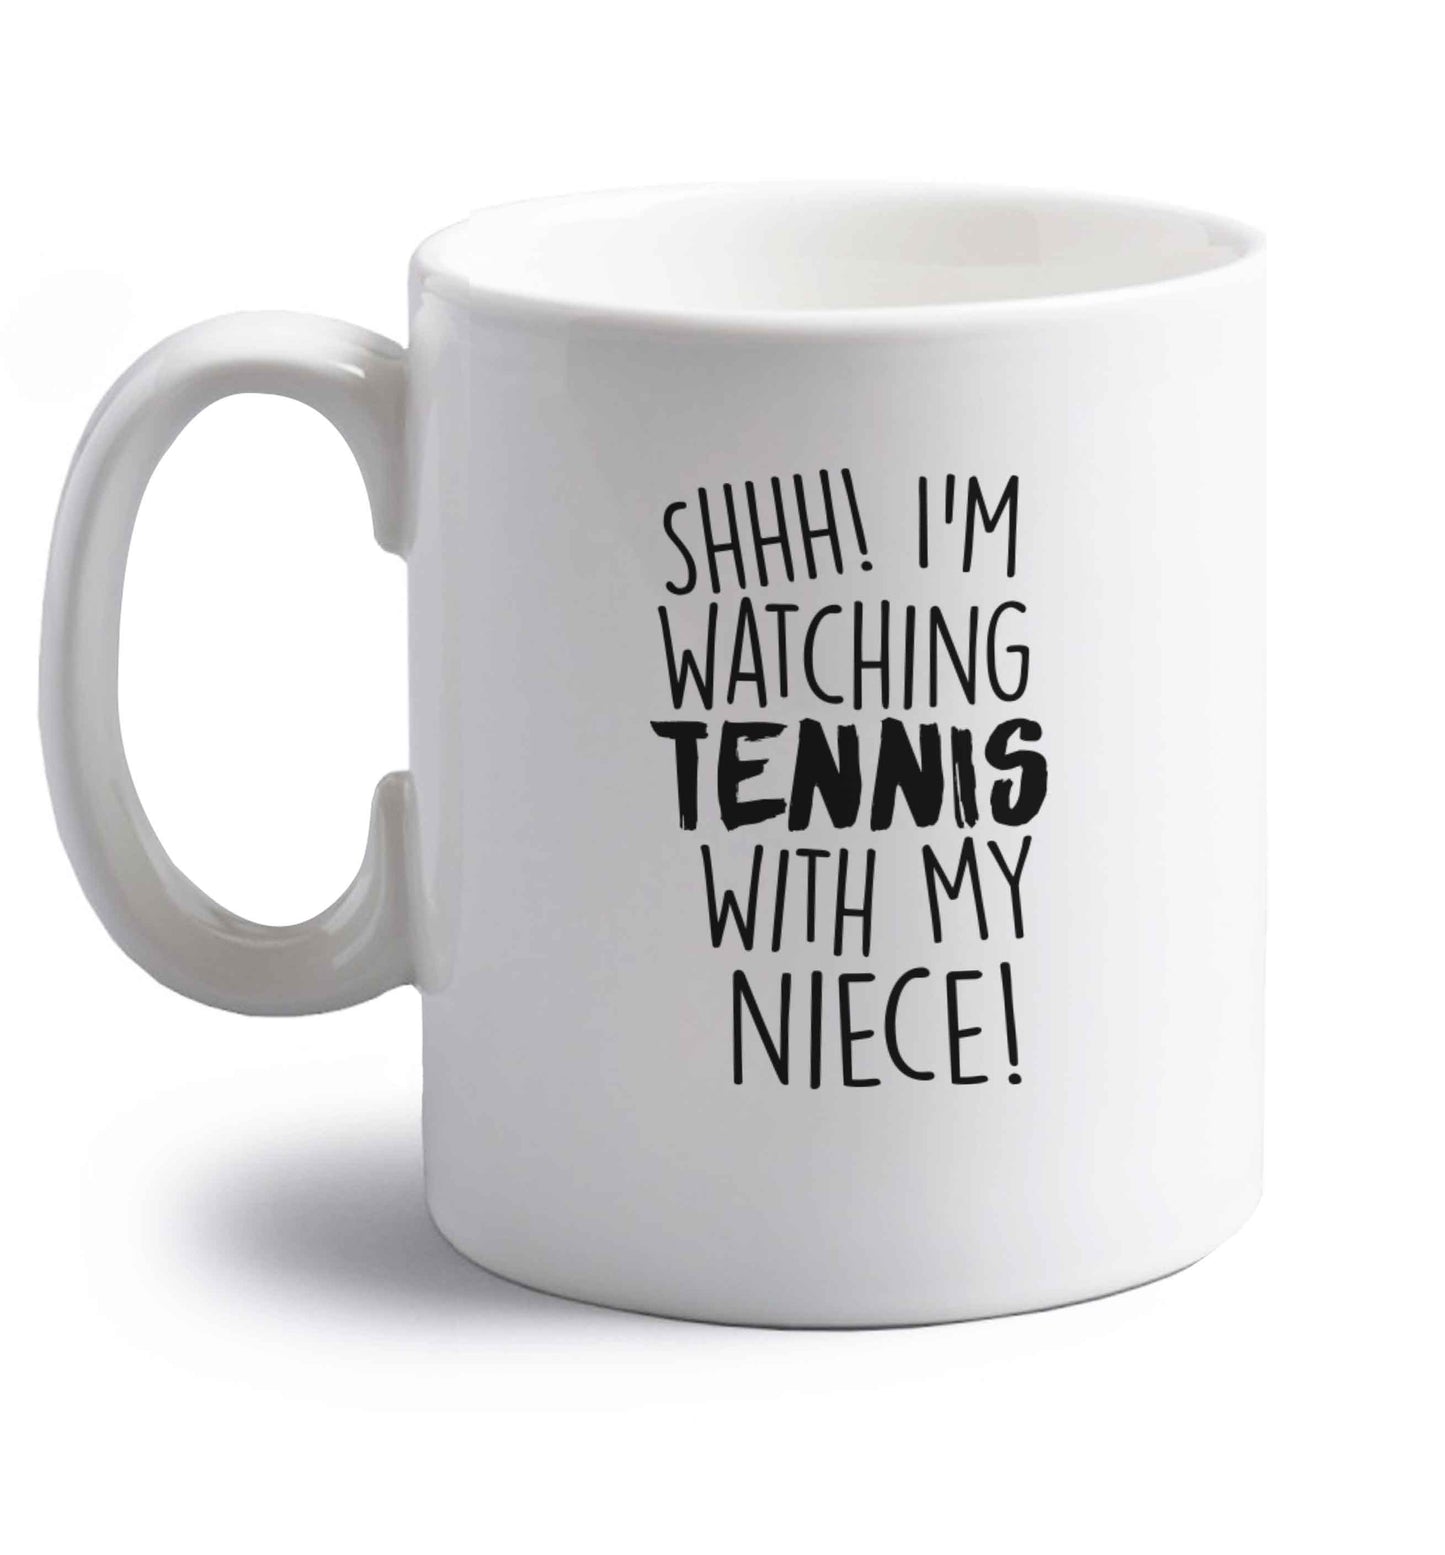 Shh! I'm watching tennis with my niece! right handed white ceramic mug 